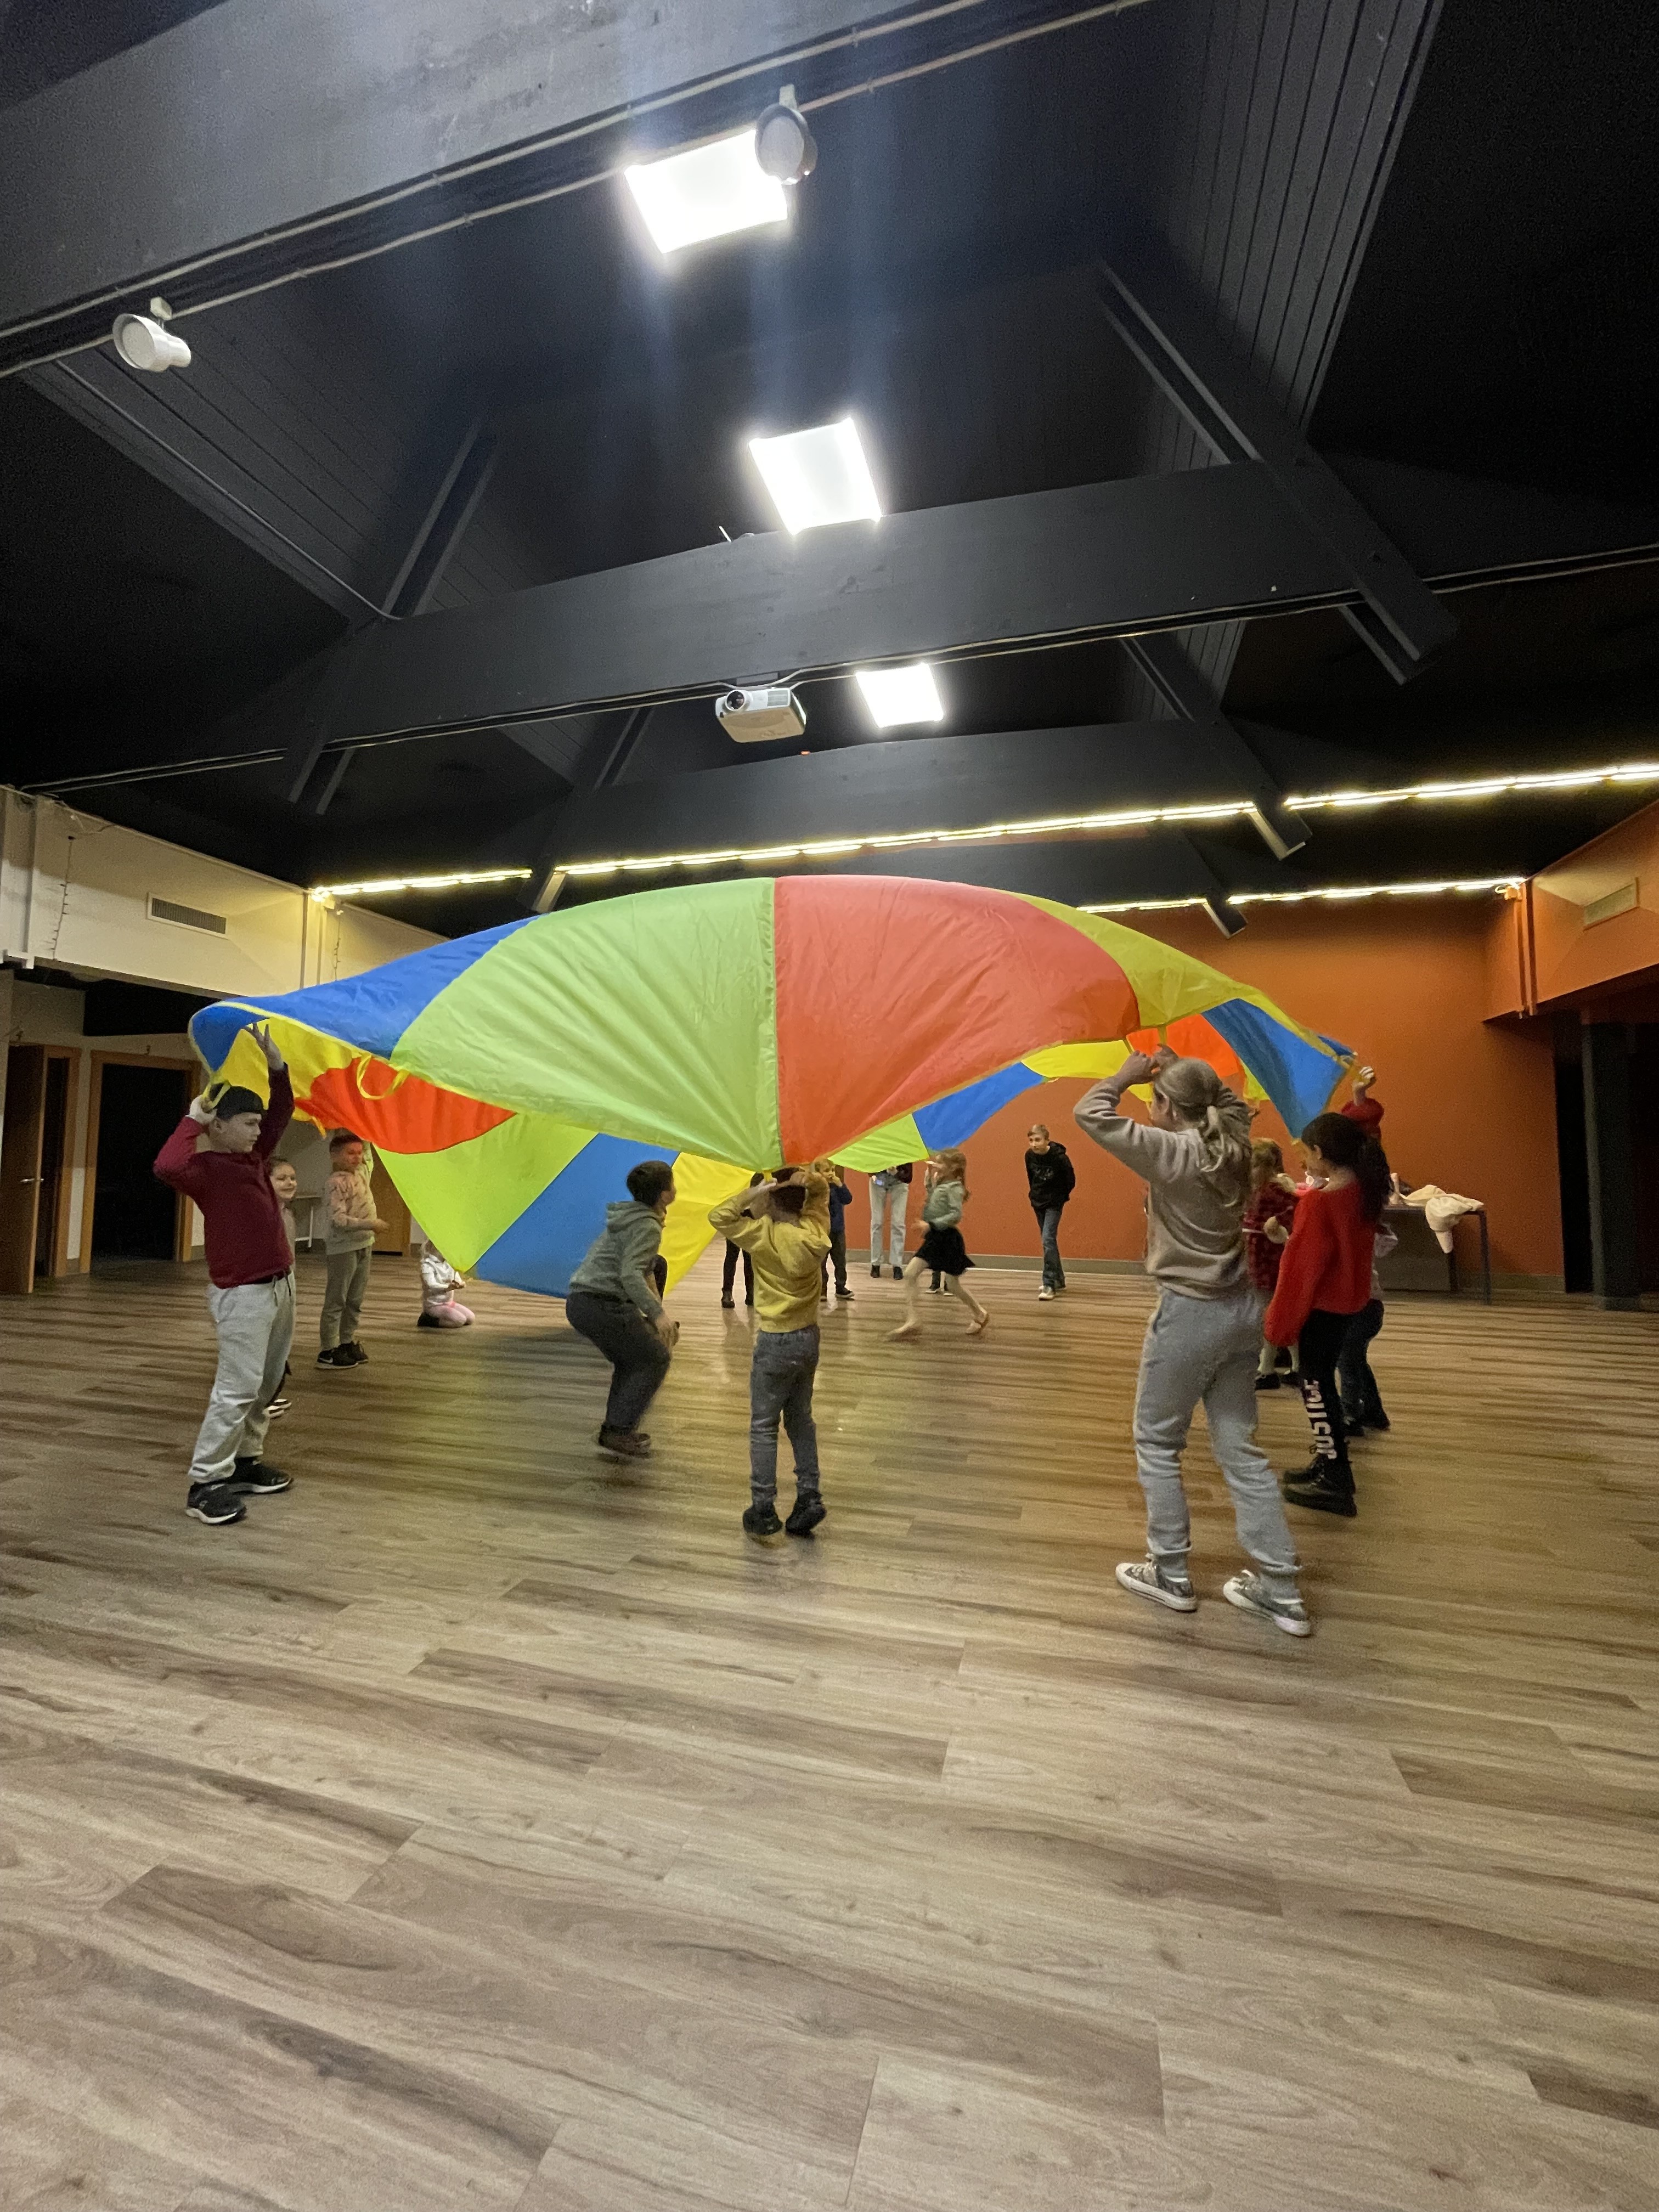 The kids playing a parachute game – I was leading so I’m not in the picture